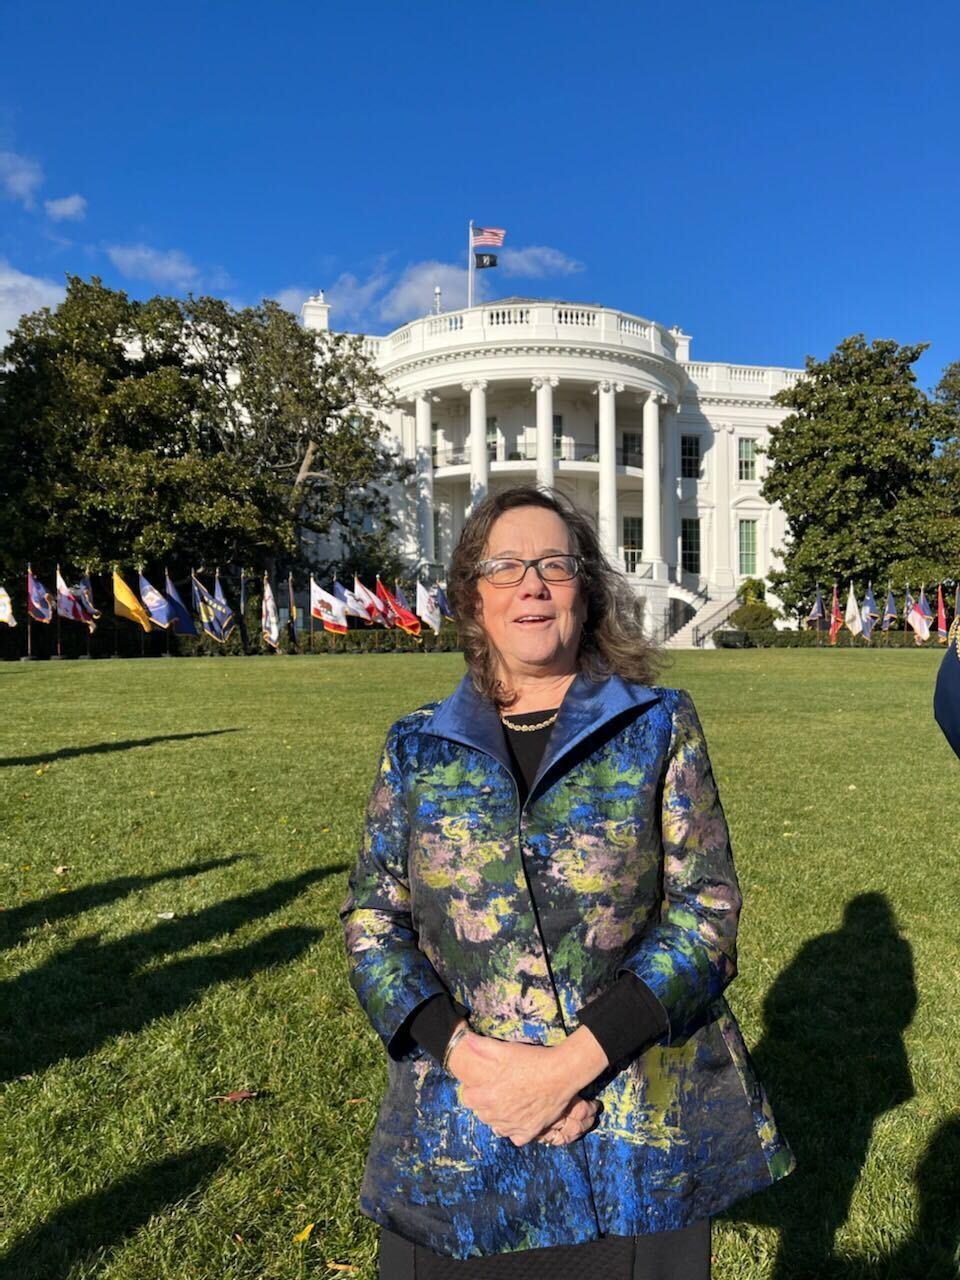 Mindy Lubber at the White House